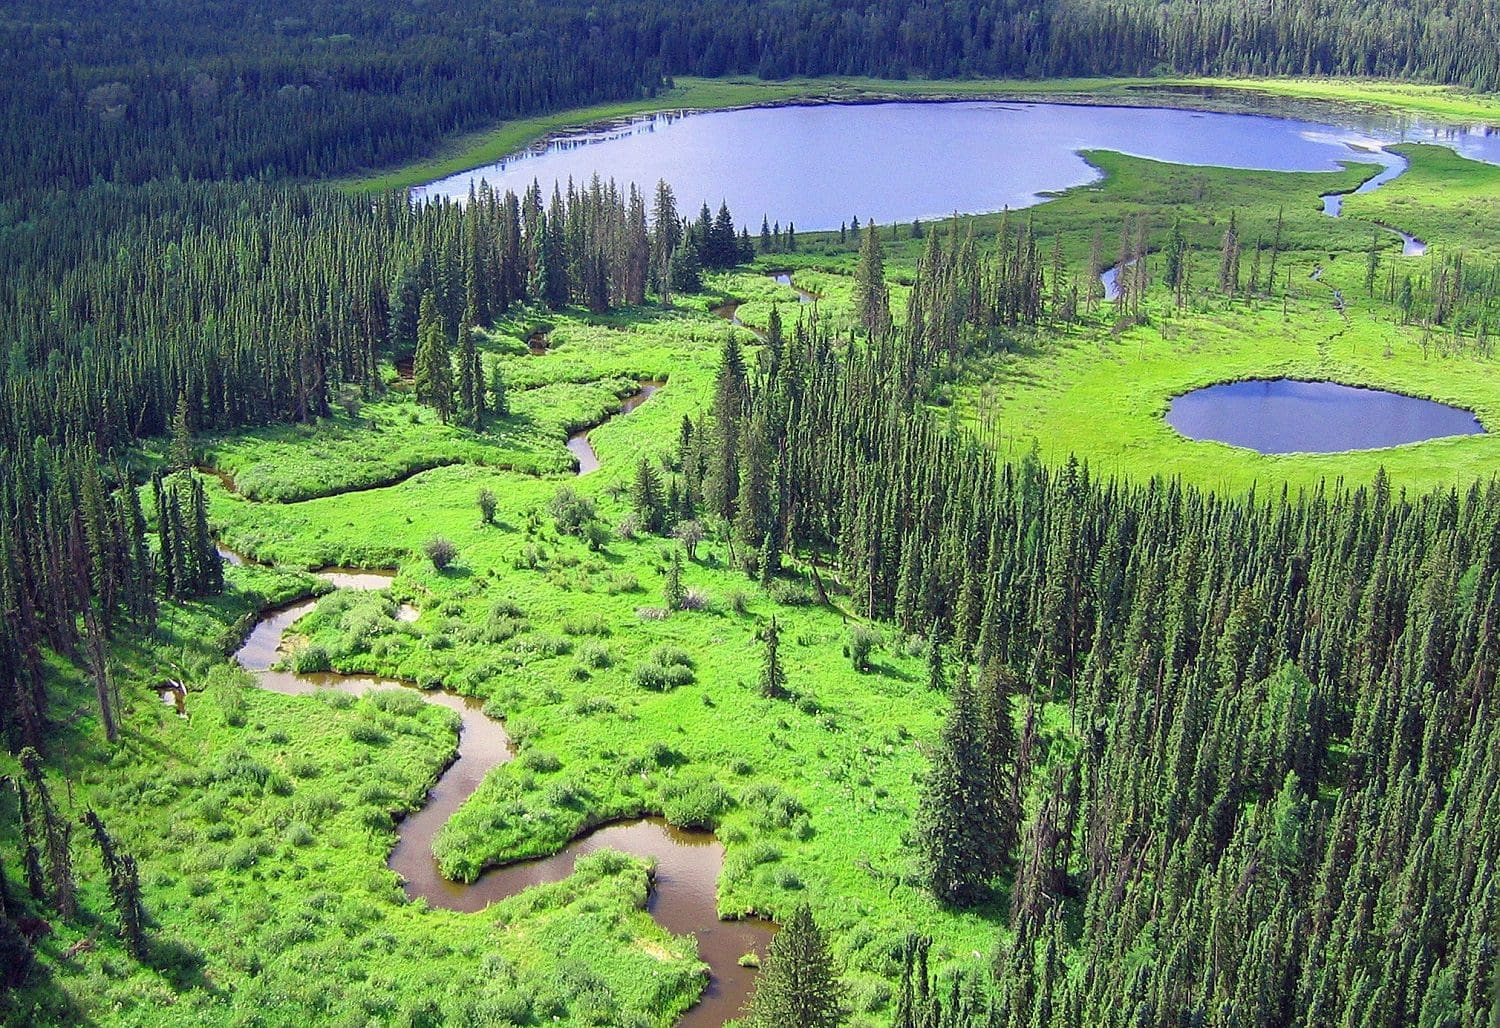 NWT residents link conservation to prosperity before heading to the polls